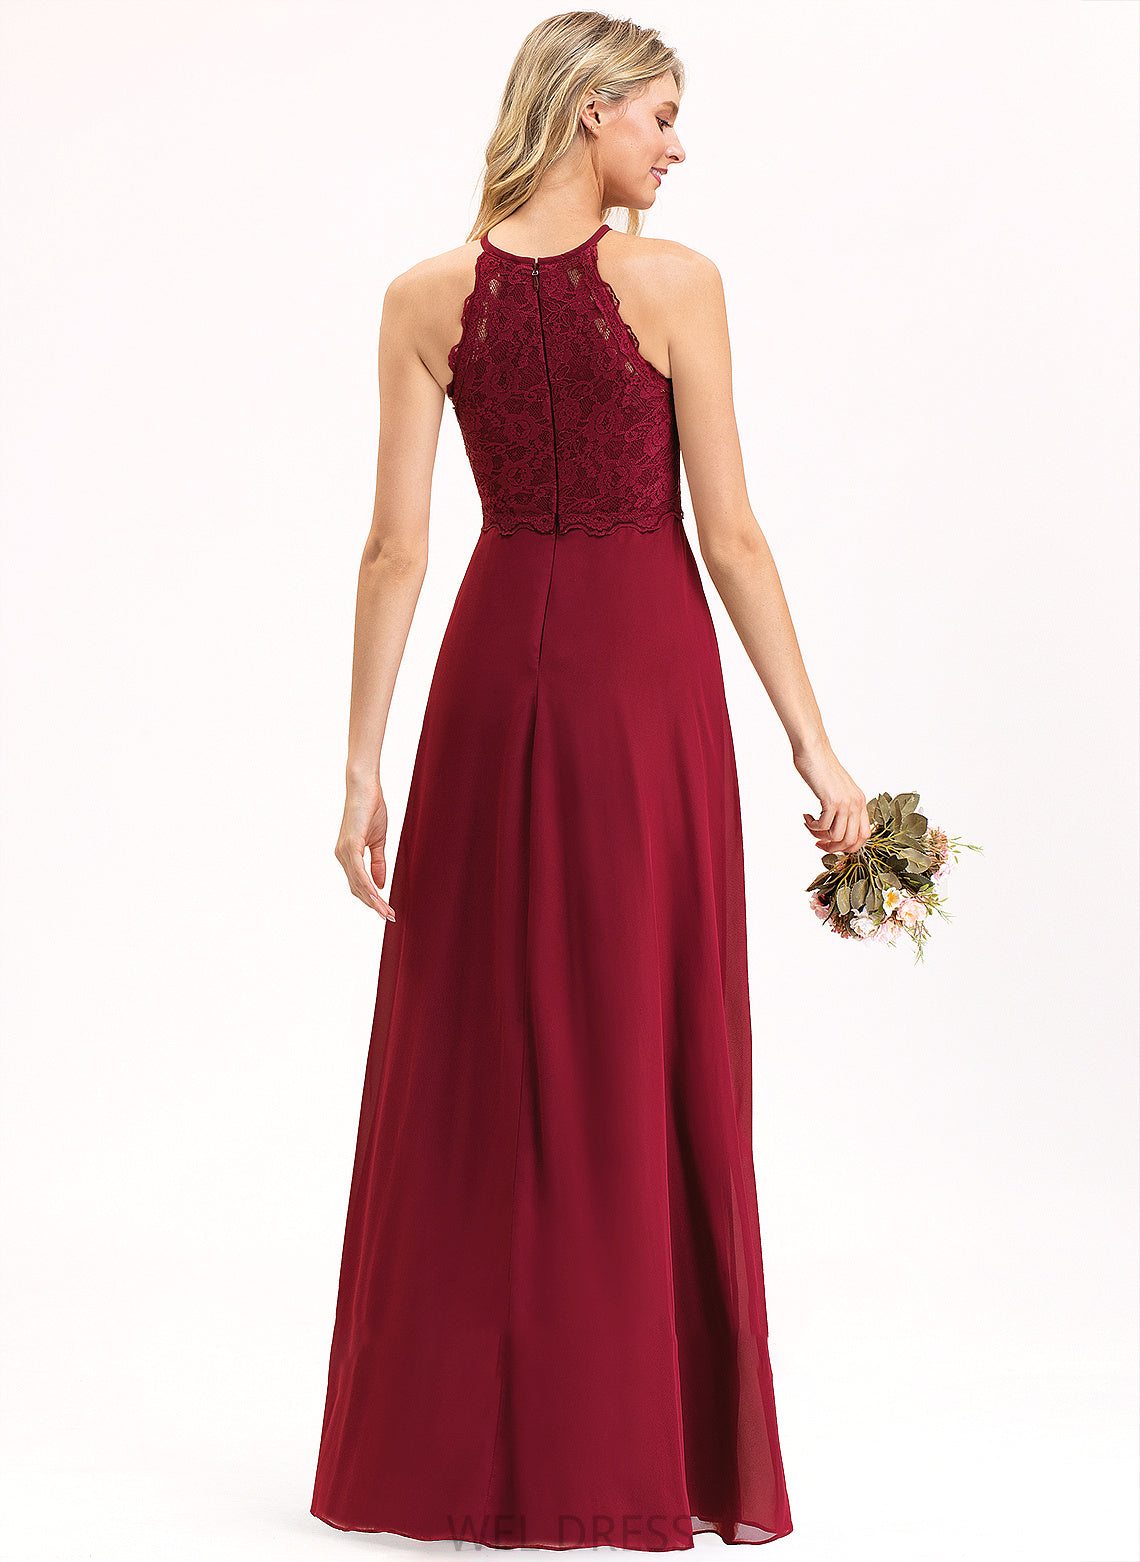 Chiffon Lace Neck A-Line Diana Prom Dresses Floor-Length Scoop